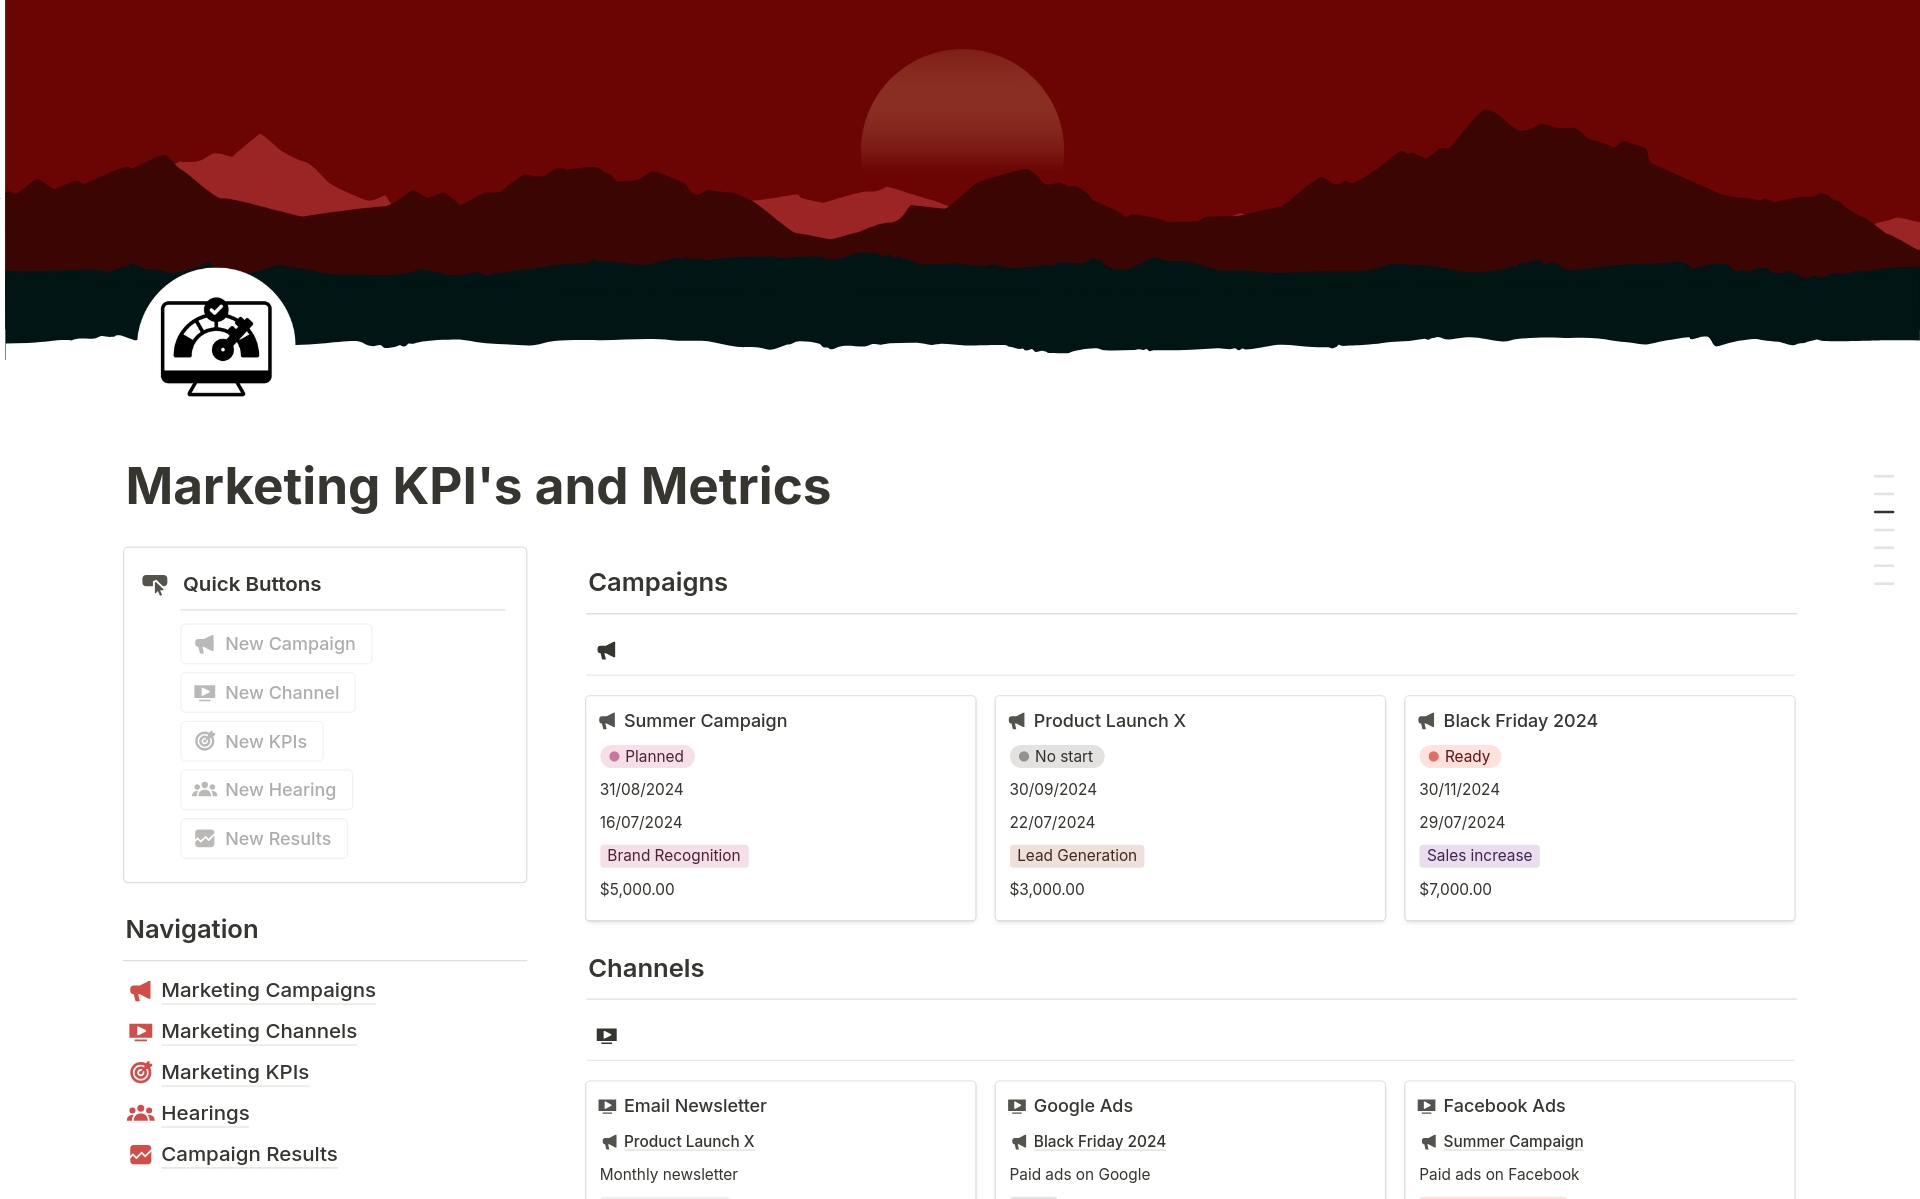 Monitor and analyze the metrics and KPIs of your marketing campaigns. Ideal for optimizing strategies and improving results.